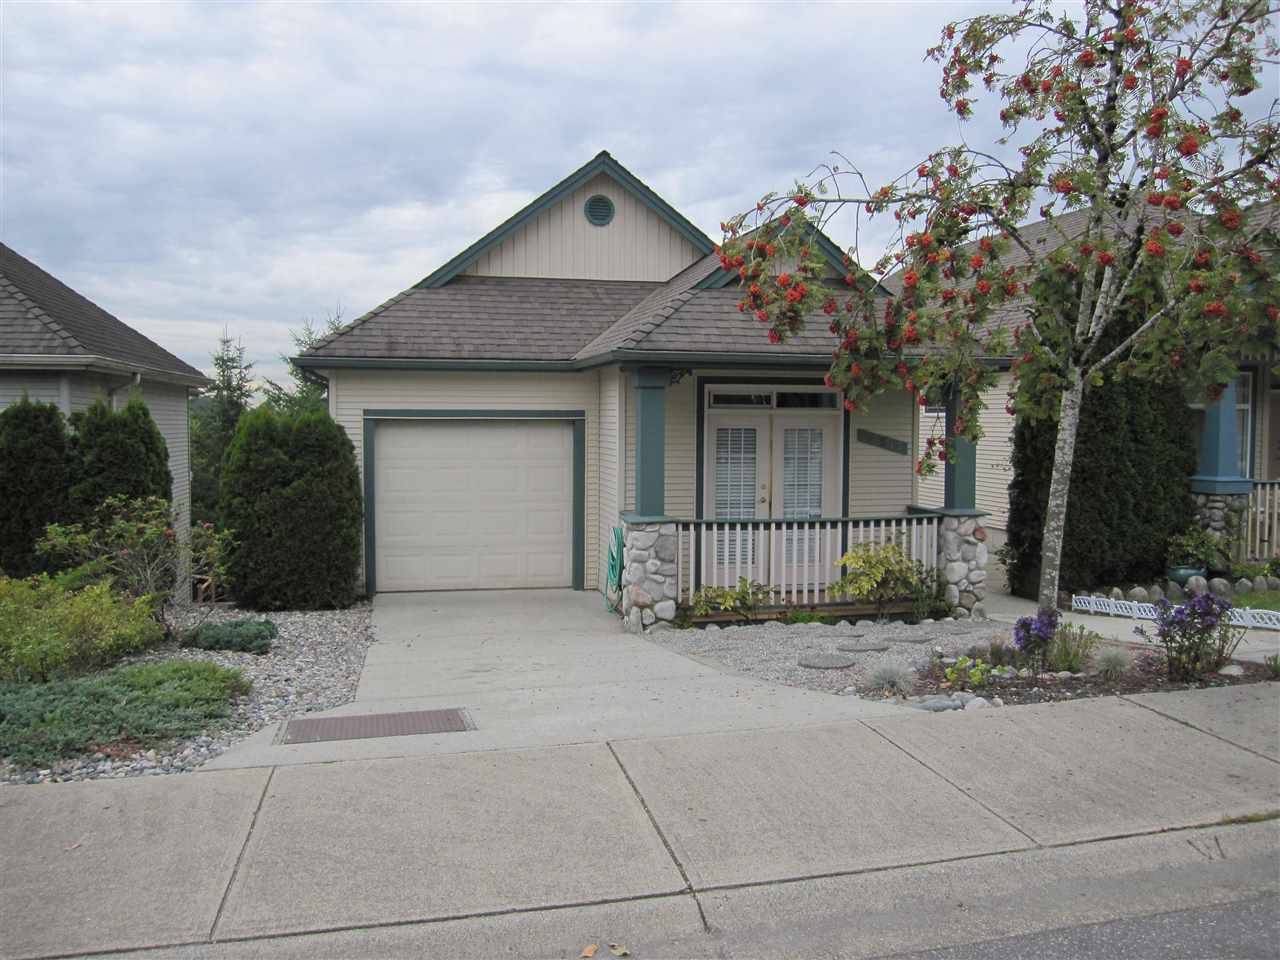 Main Photo: 11517 228 STREET in Maple Ridge: East Central House for sale : MLS®# R2123978